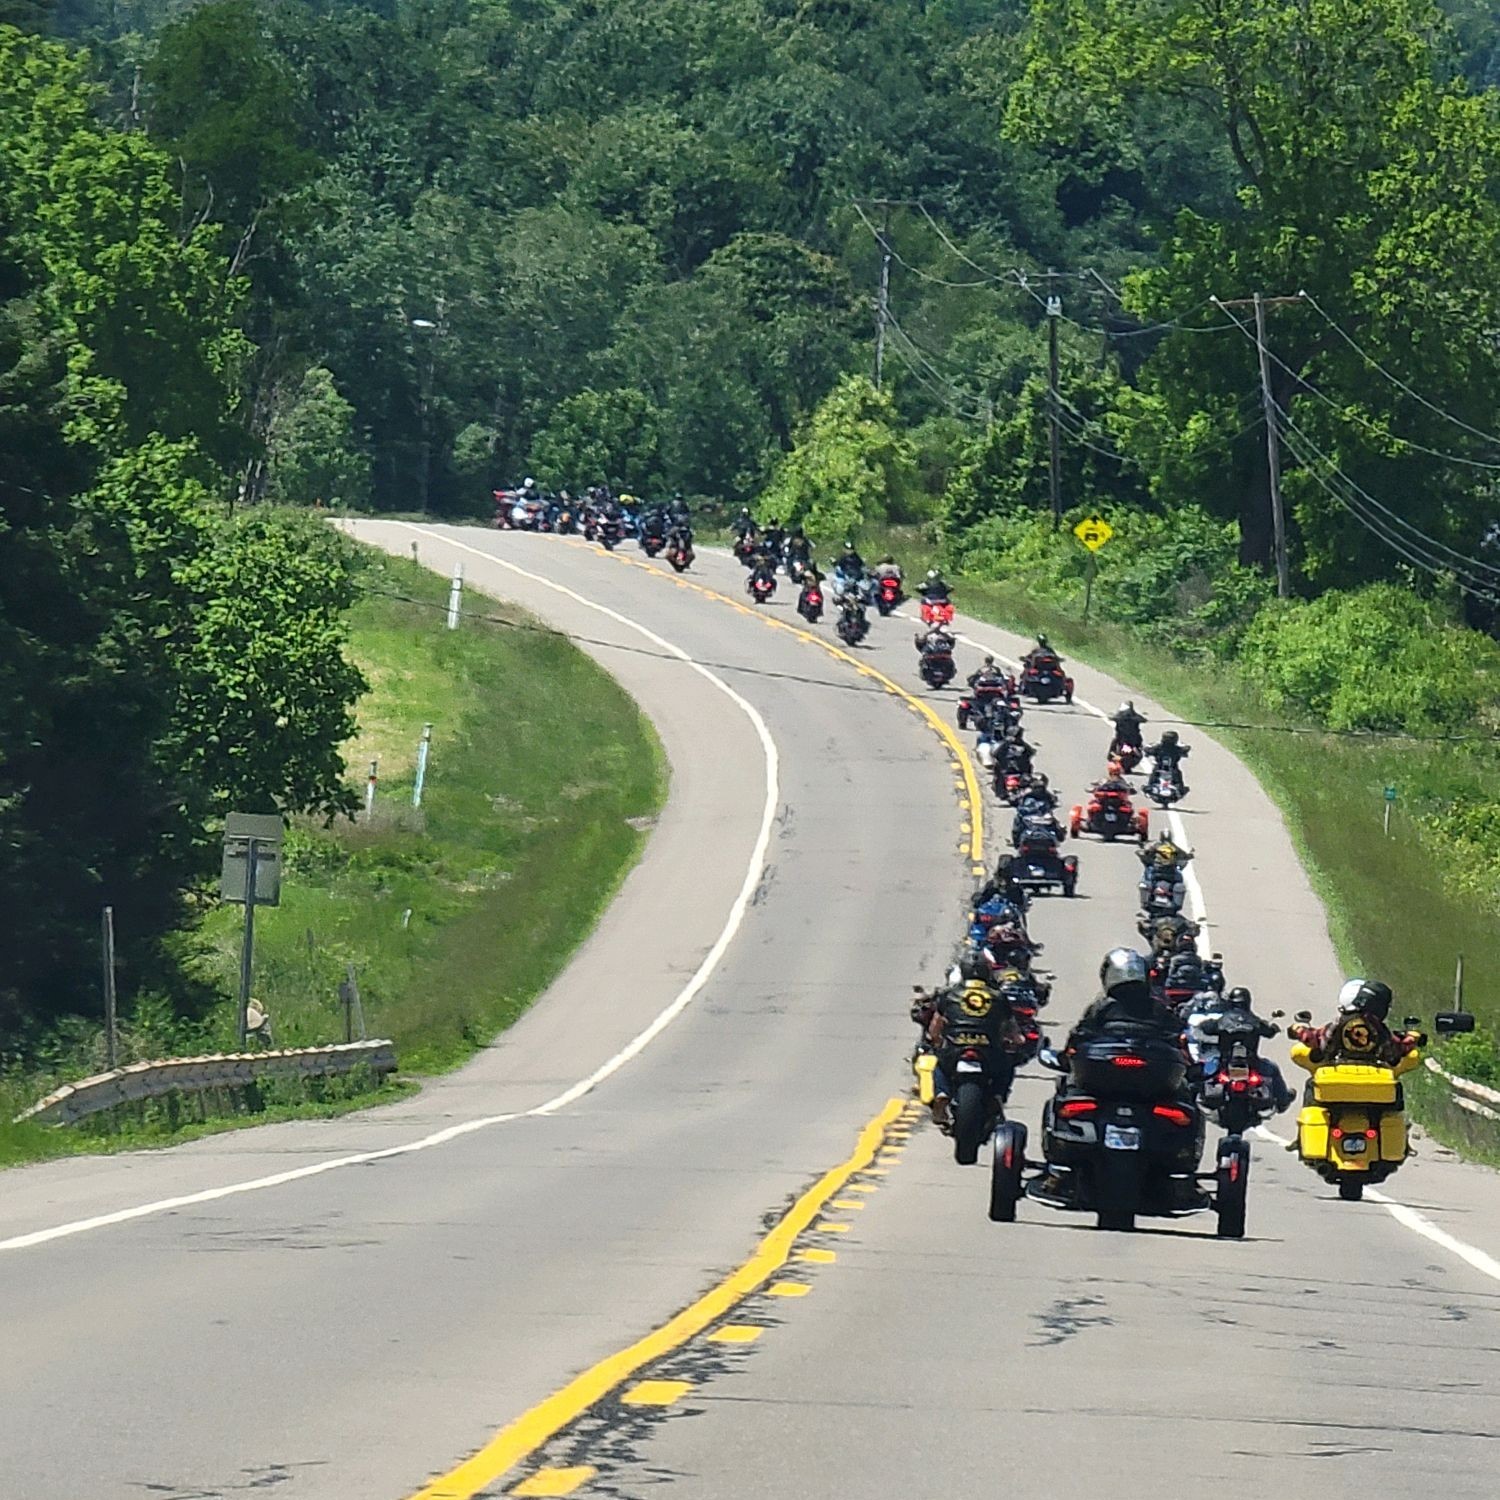 Motorcycle riders and members of the Combat Vets Motorcycle Association move together down the road in staggered formation to raise awareness for Veteran Suicide.